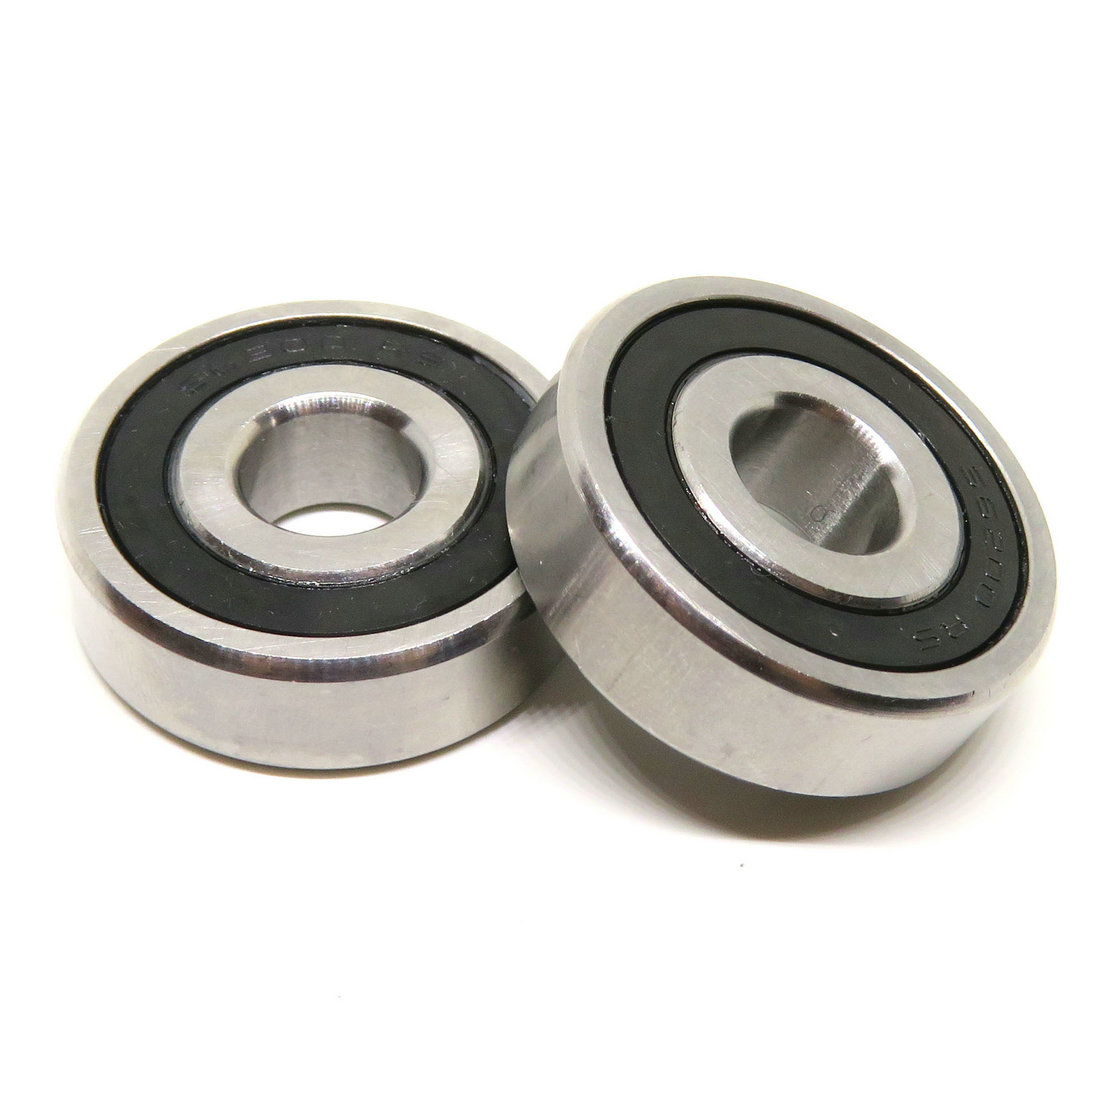 Pharmaceutical Applications Part 35x80x21mm Stainless Steel Deep Groove Ball Bearing S607RS.jpg